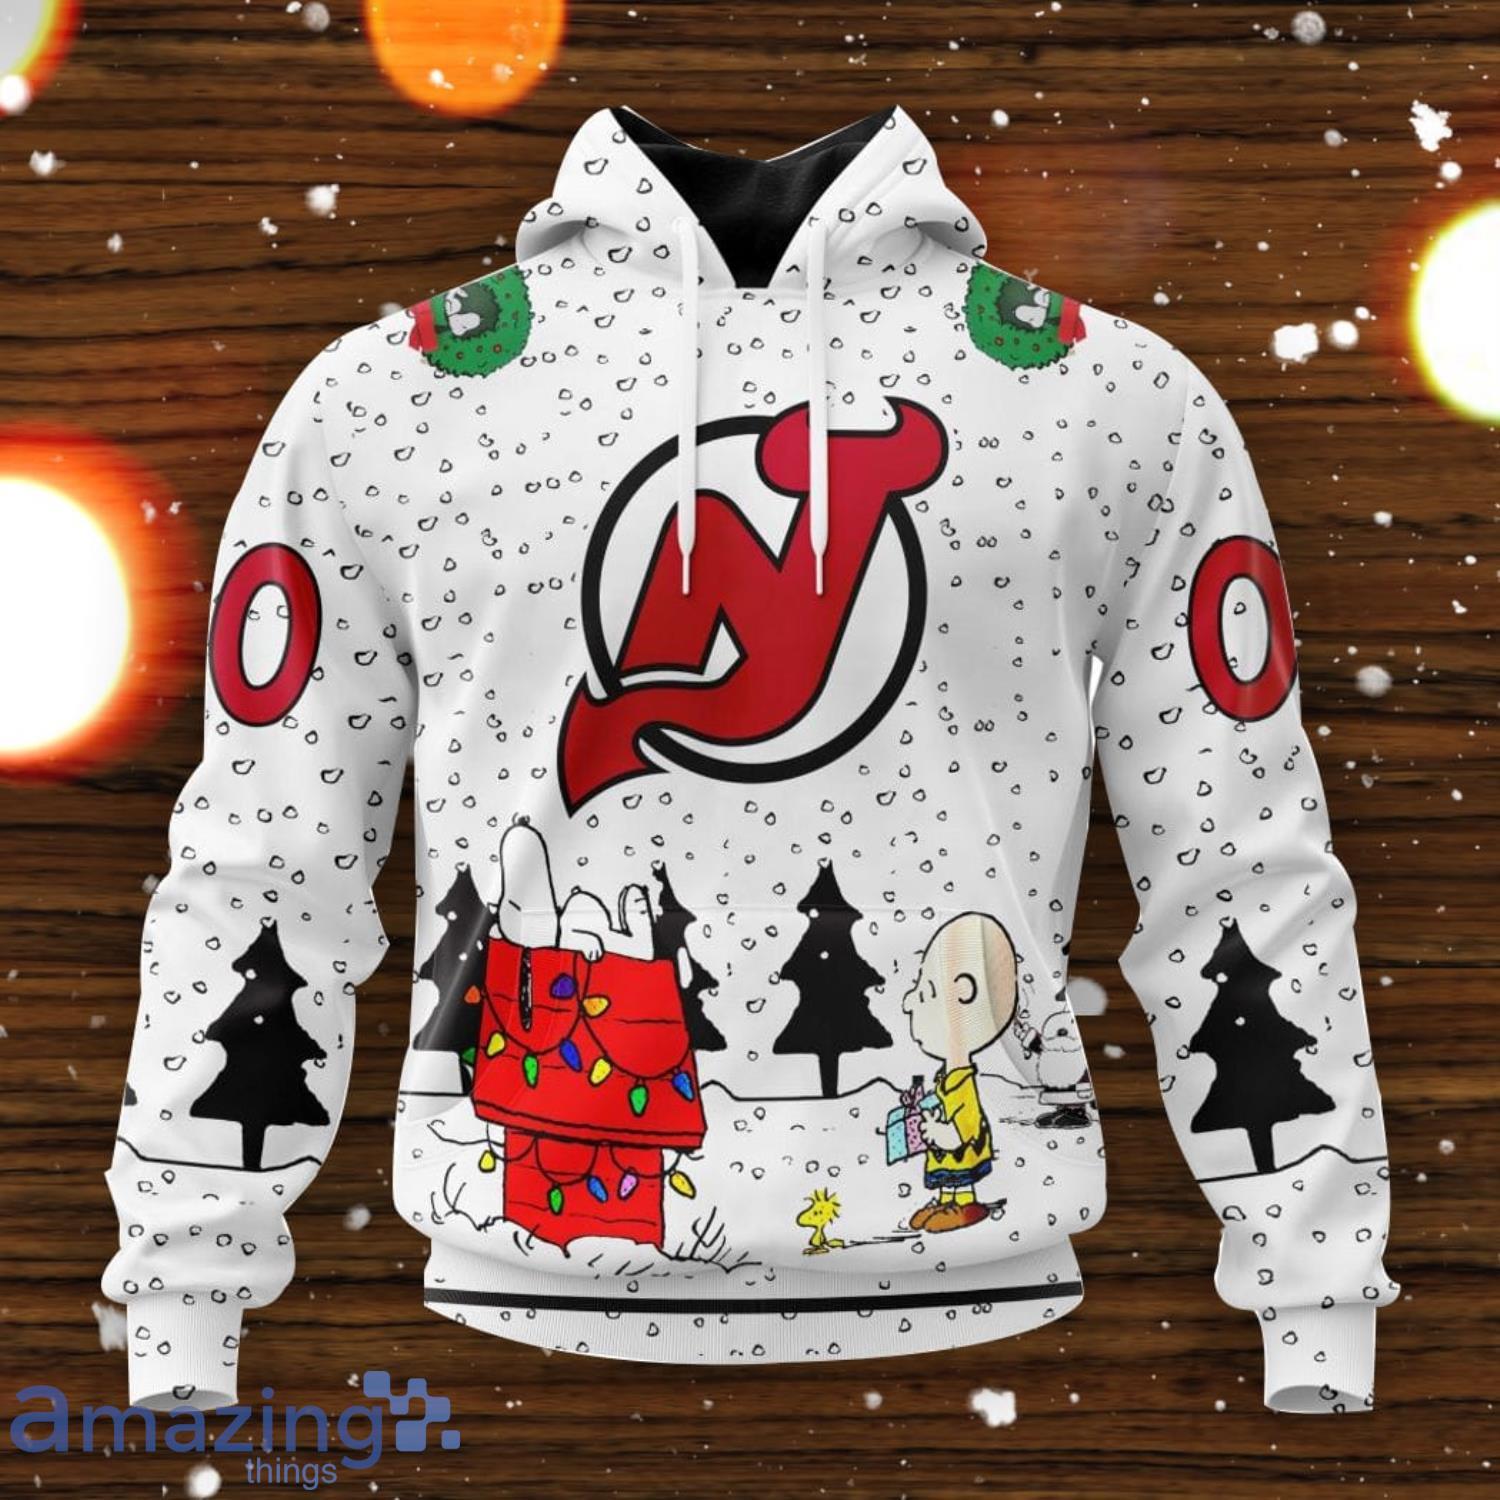 New Jersey Devils: 12 Gifts From Team This Christmas Season